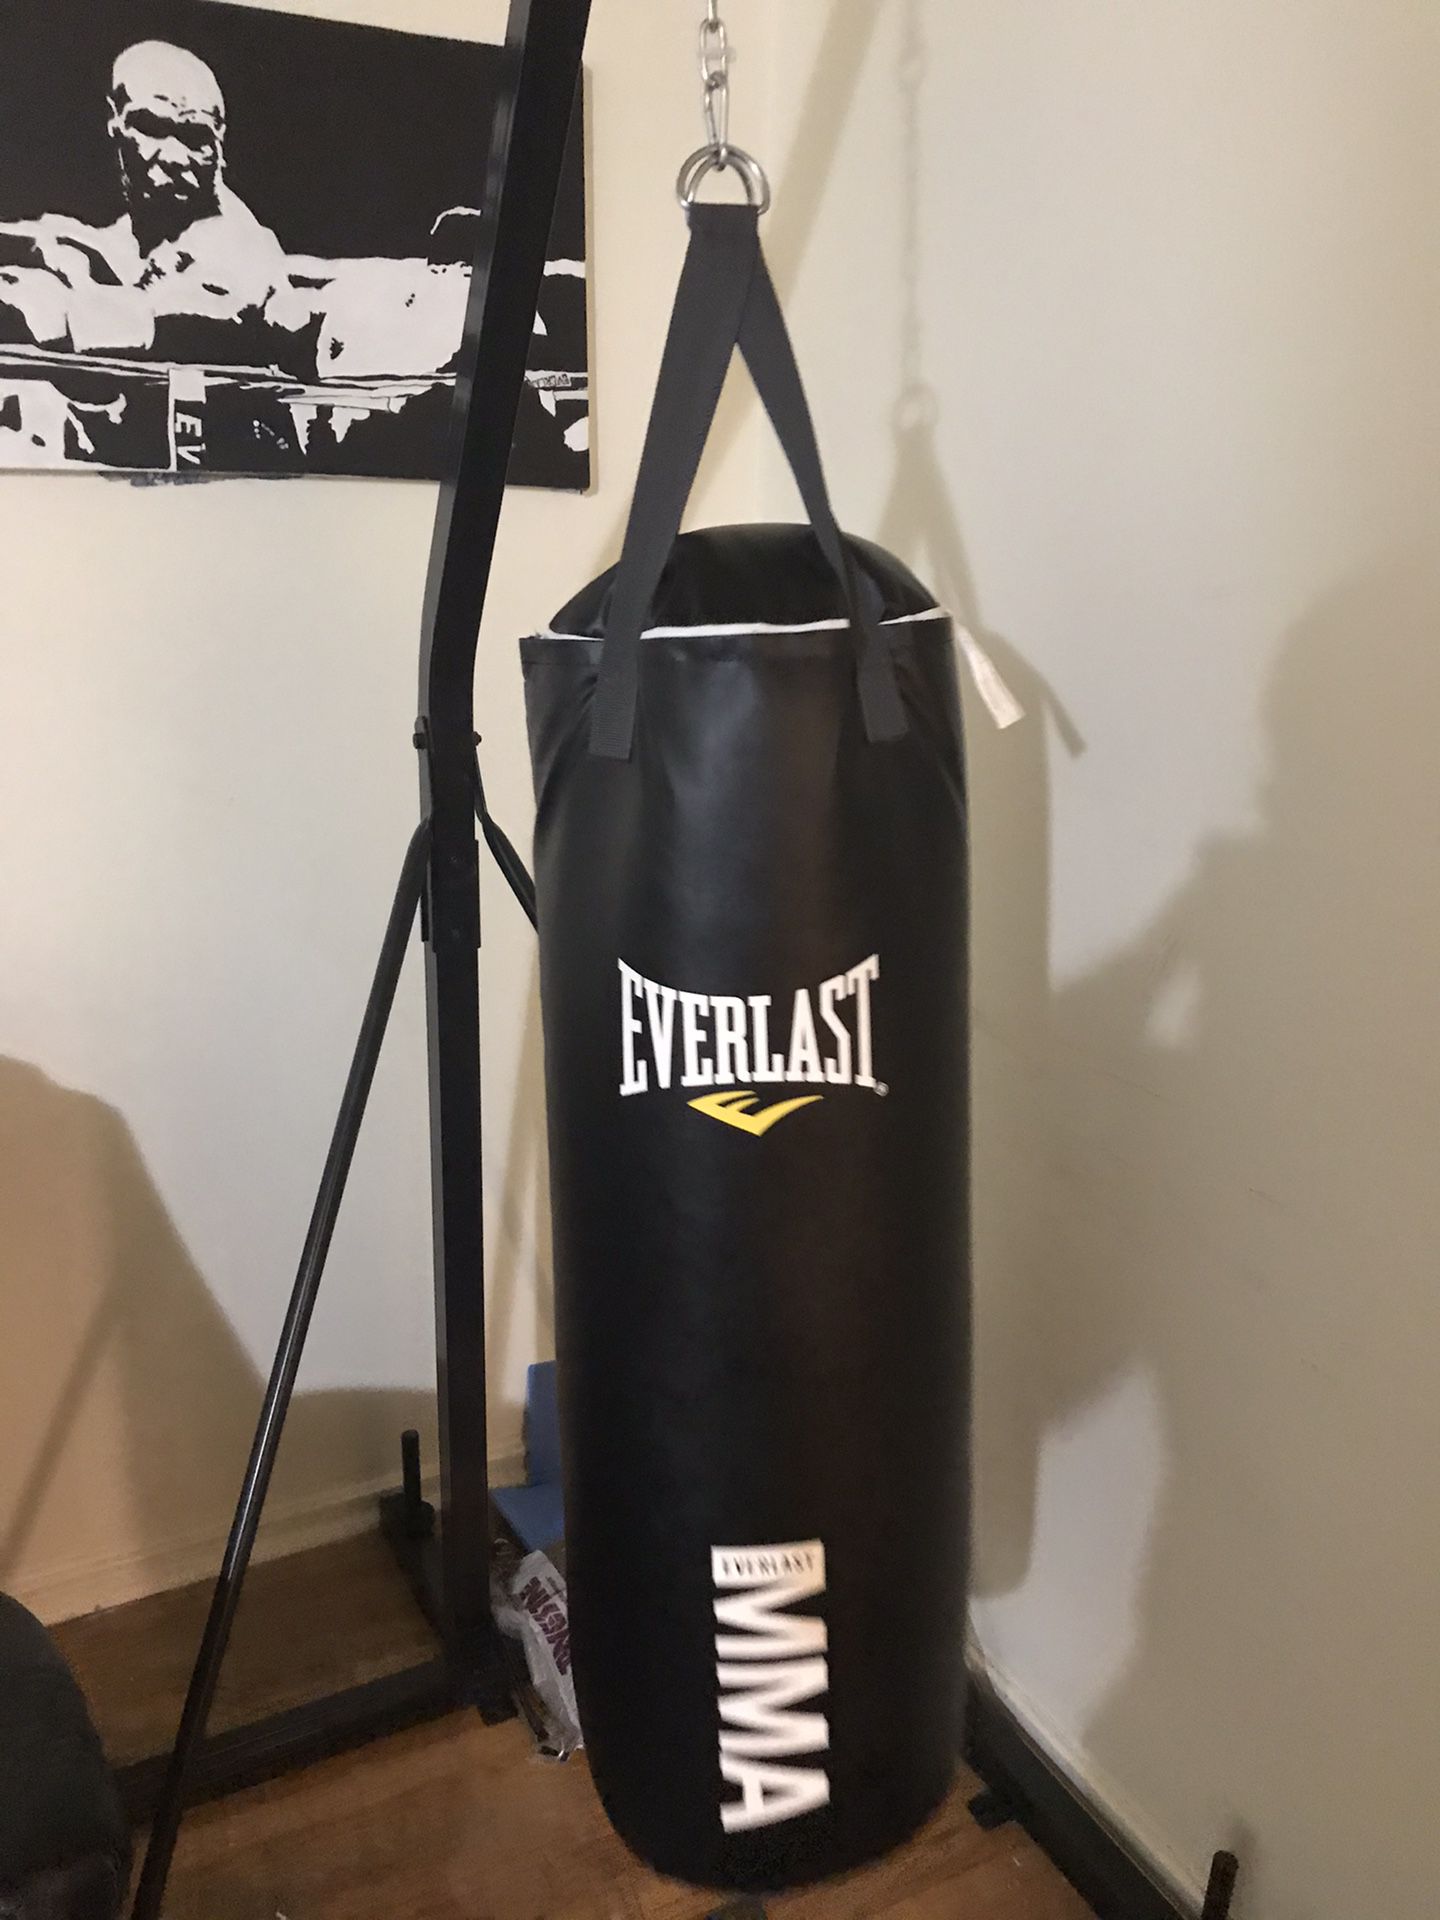 Everlast punching bag and stand with boxing gloves